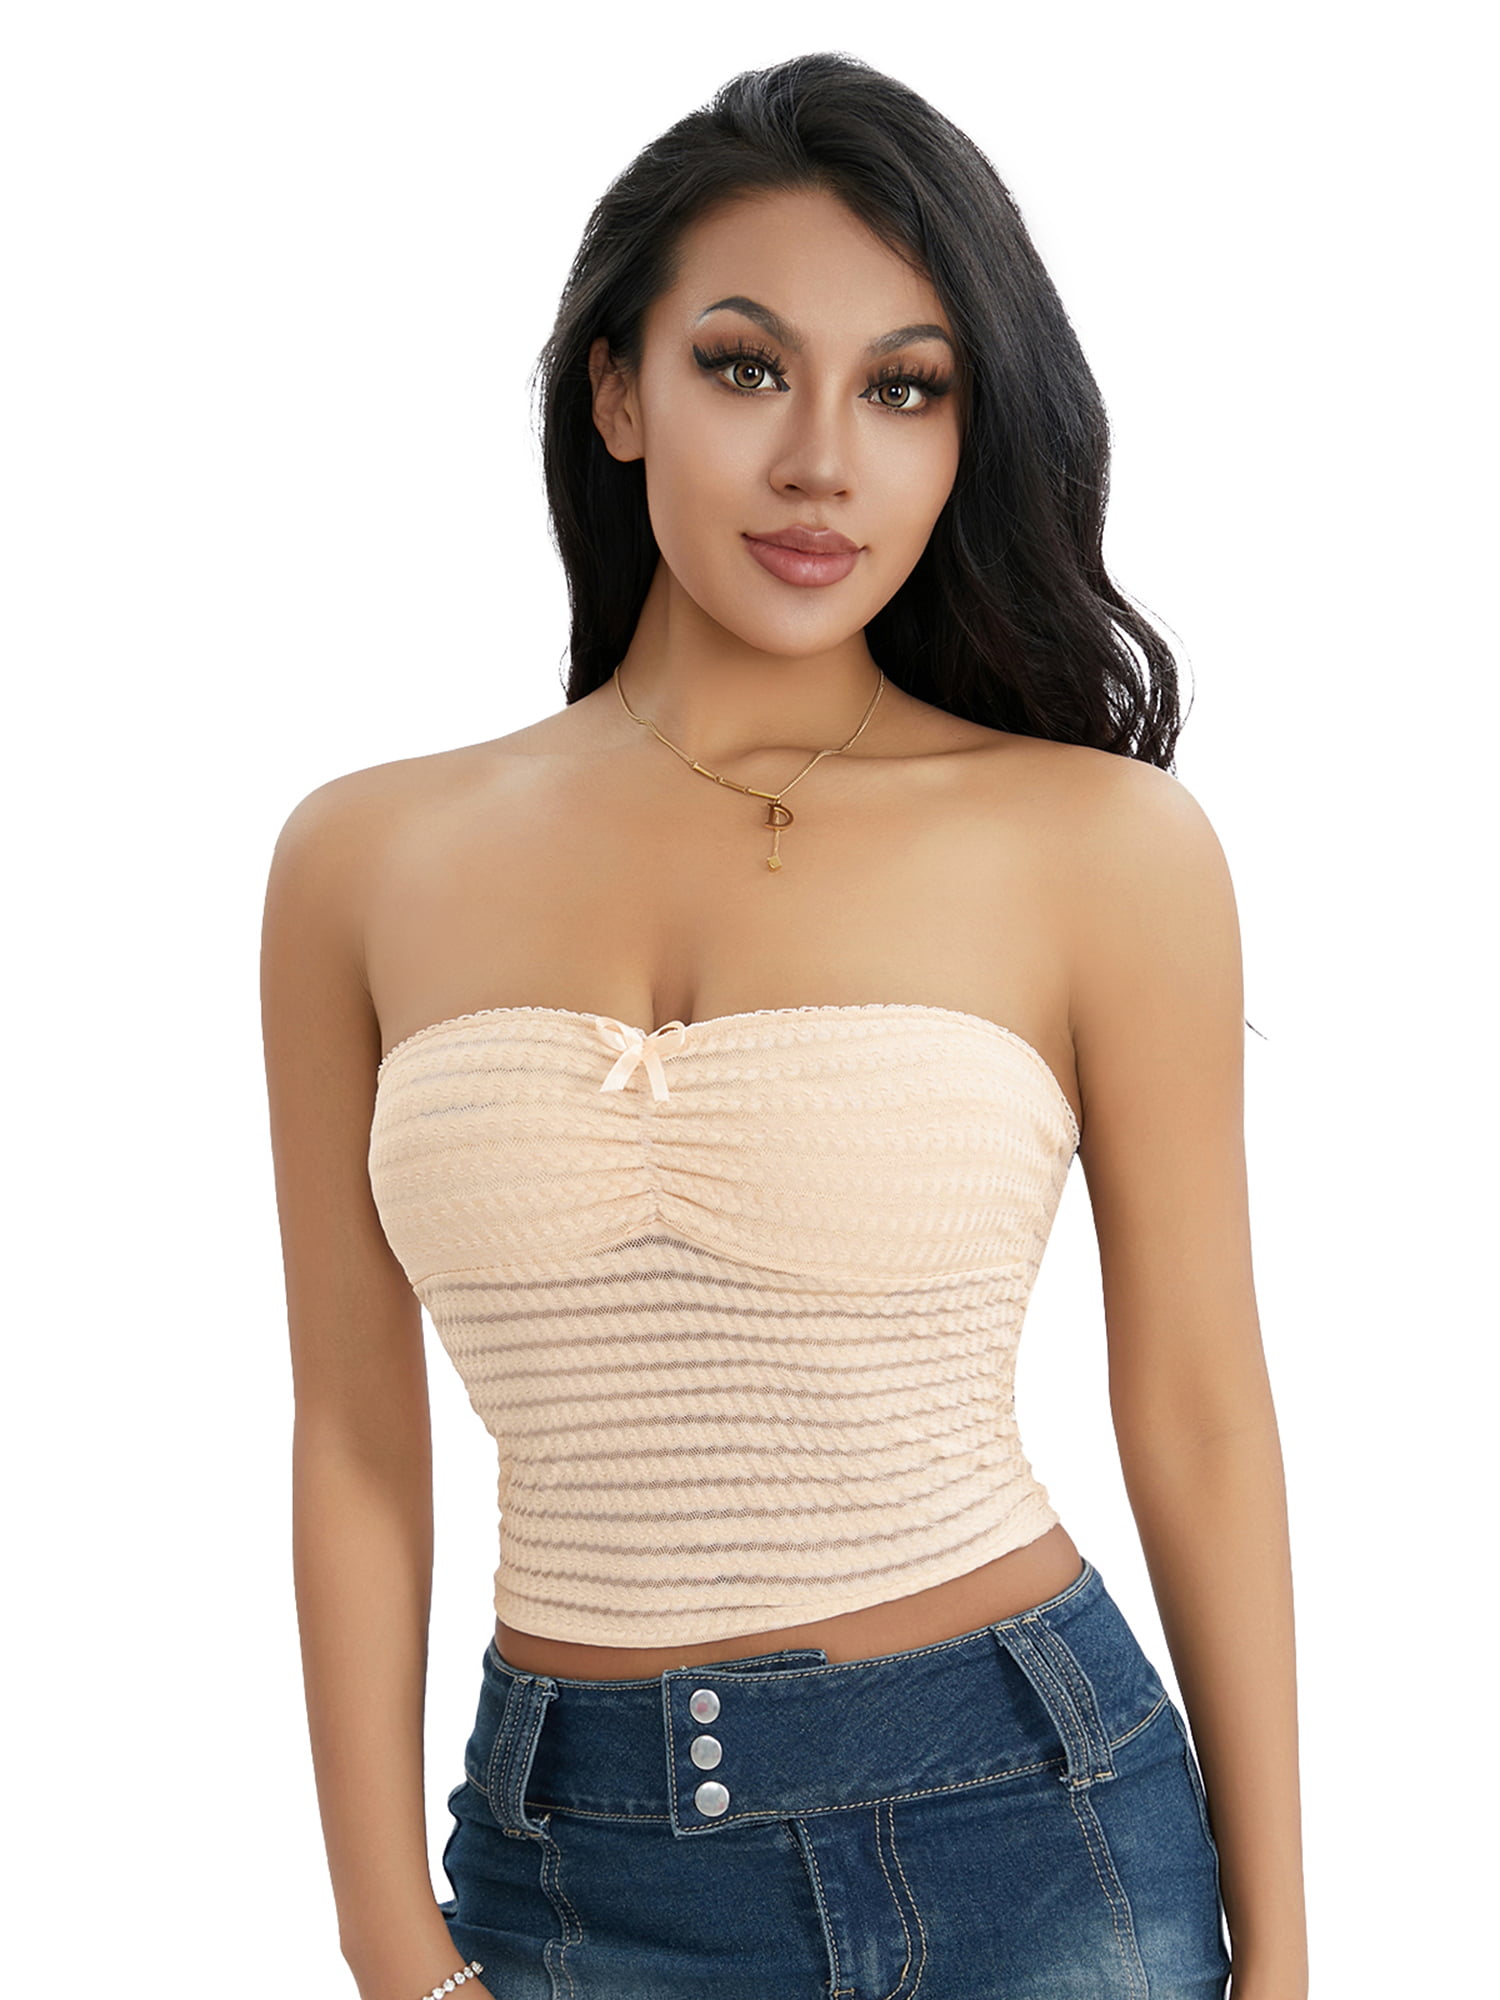 Wassery Women Exy Strapless Tube Tops Off Shoulder Sleeveless Bustier Crop Tops Ruched Bandeau 